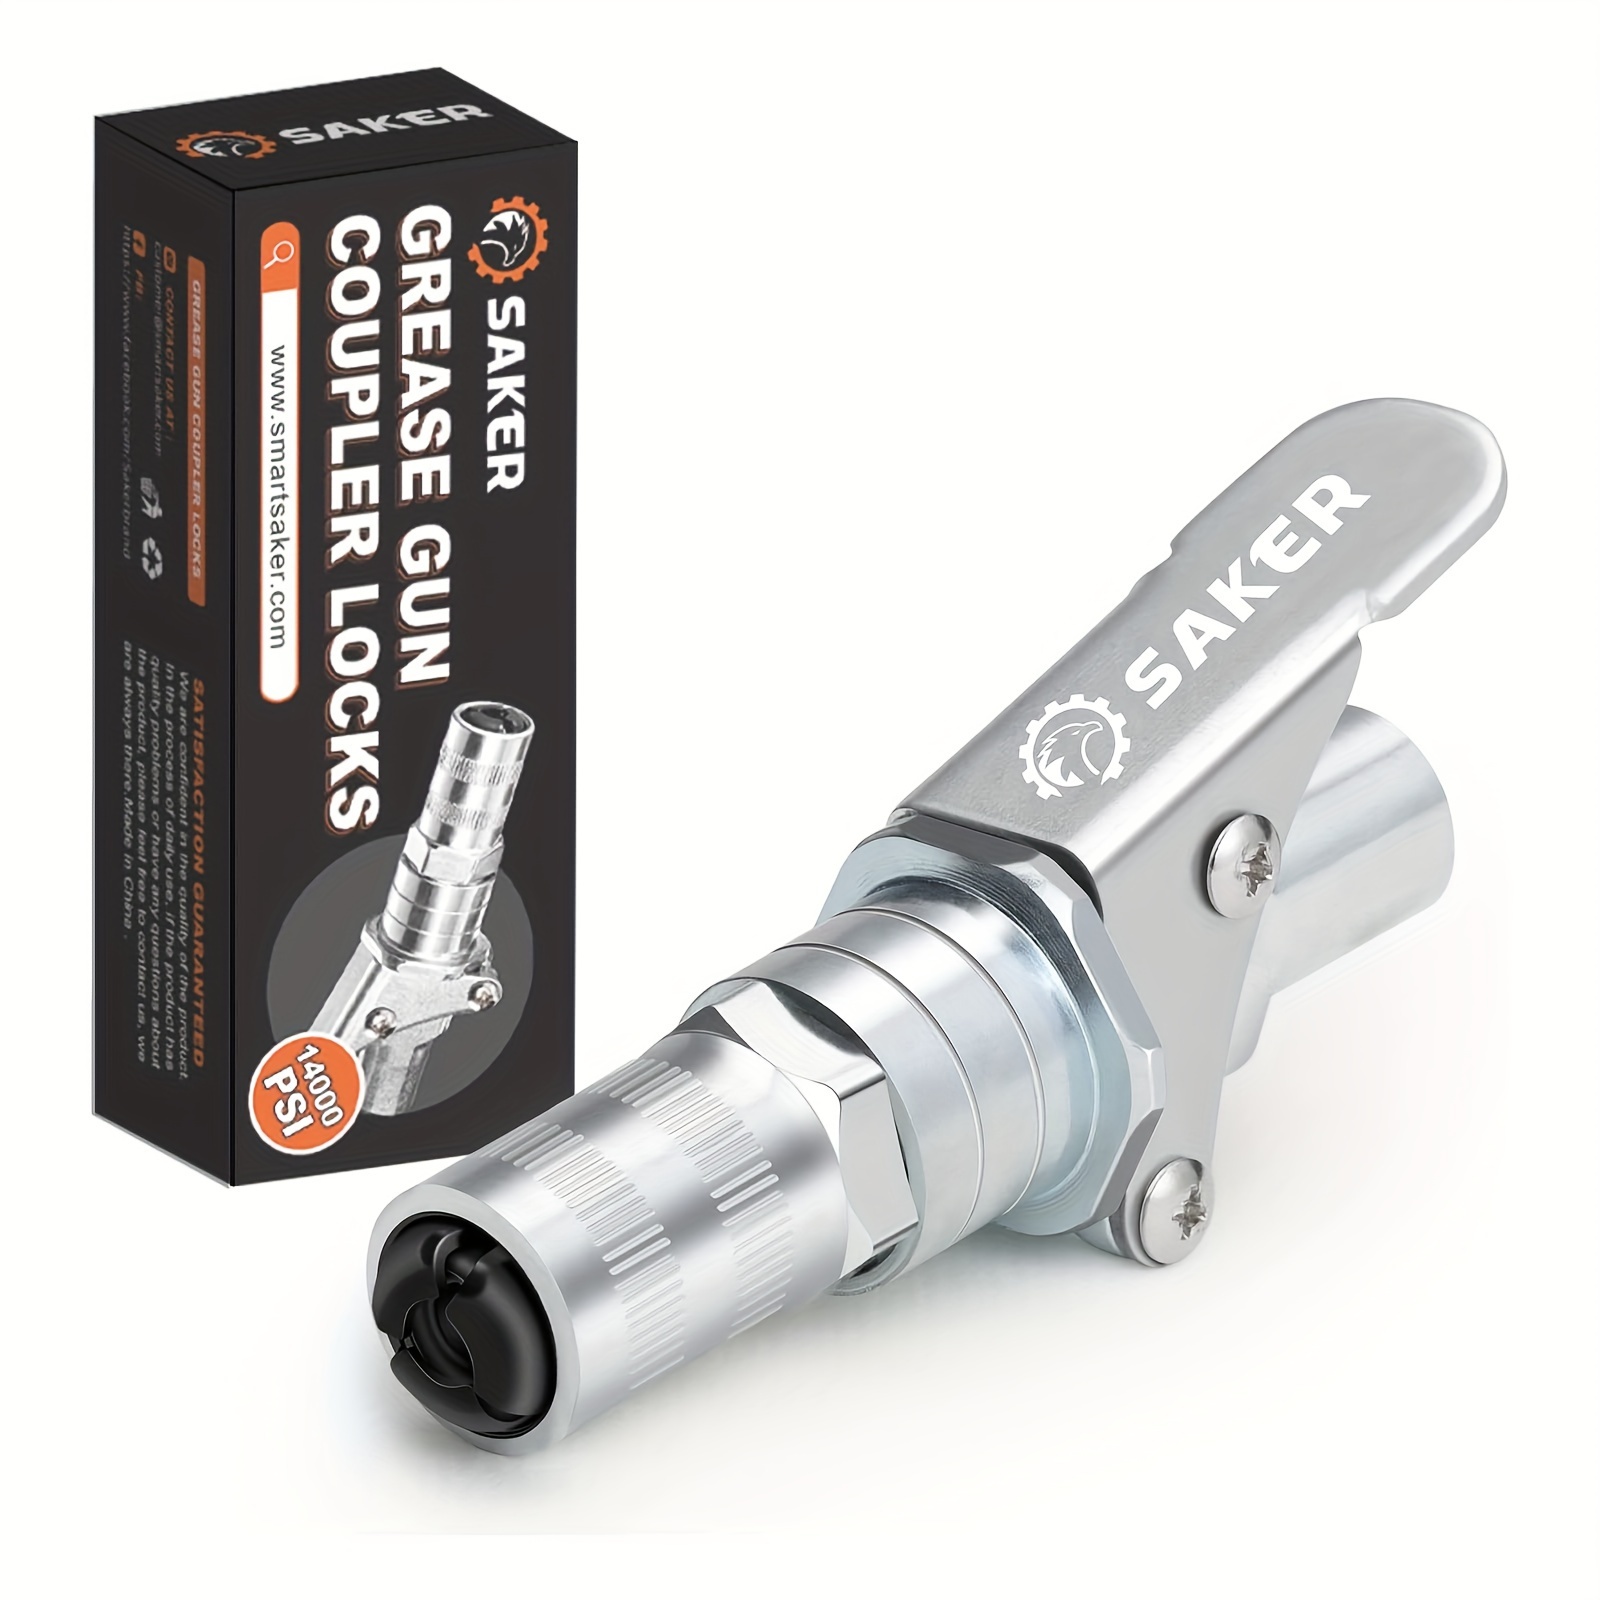 

Saker Grease Gun Coupler-upgrade To 14000 Psi, Duty Quick Release Grease Couplers, Compatible With All Grease Guns 1/8" Npt Fittings (1 Pc)